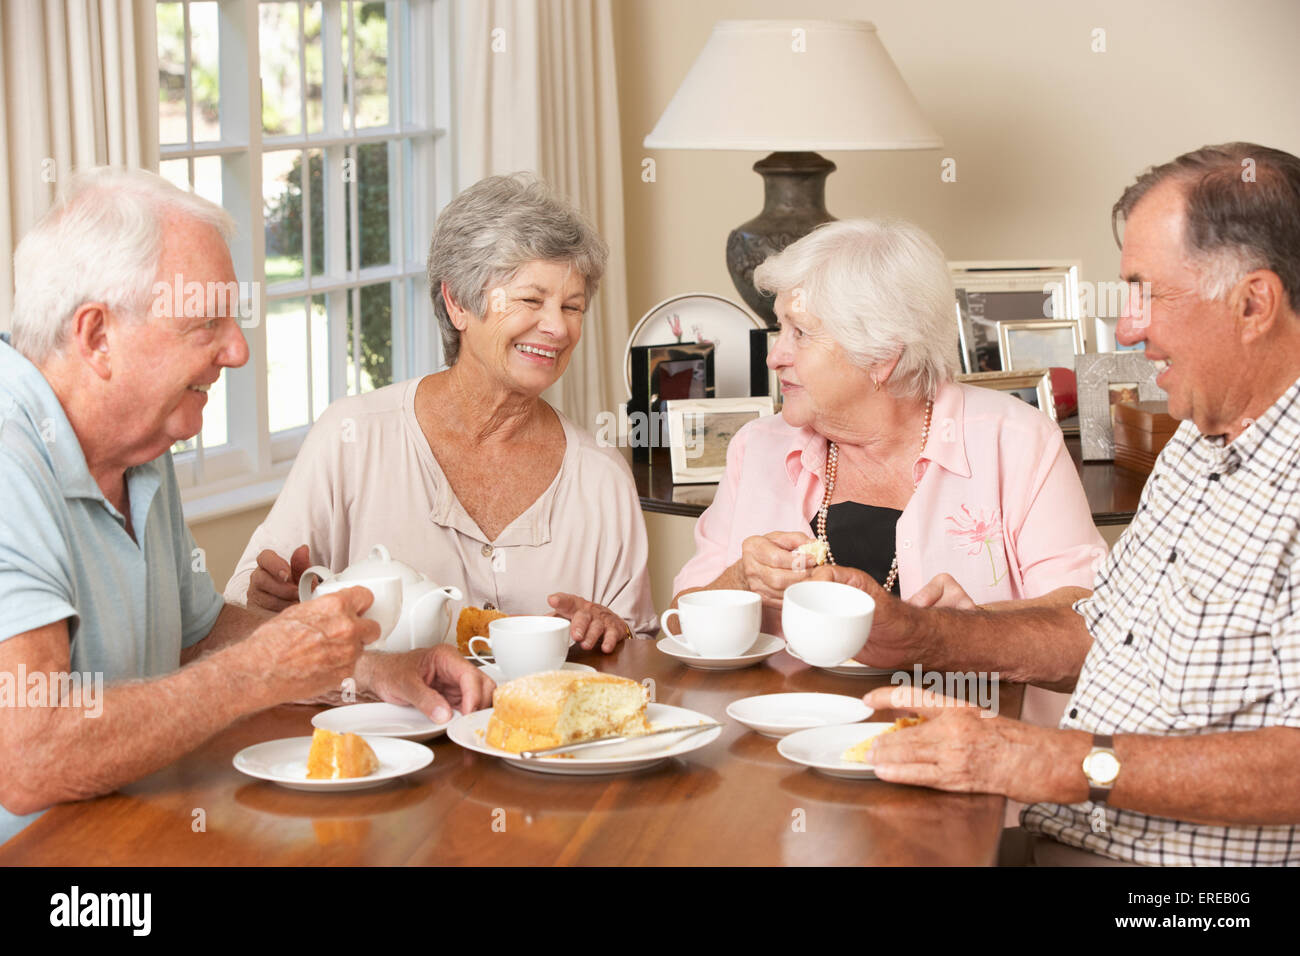 Group Of Senior Couples Enjoying Afternoon Tea Together At Home Stock Photo